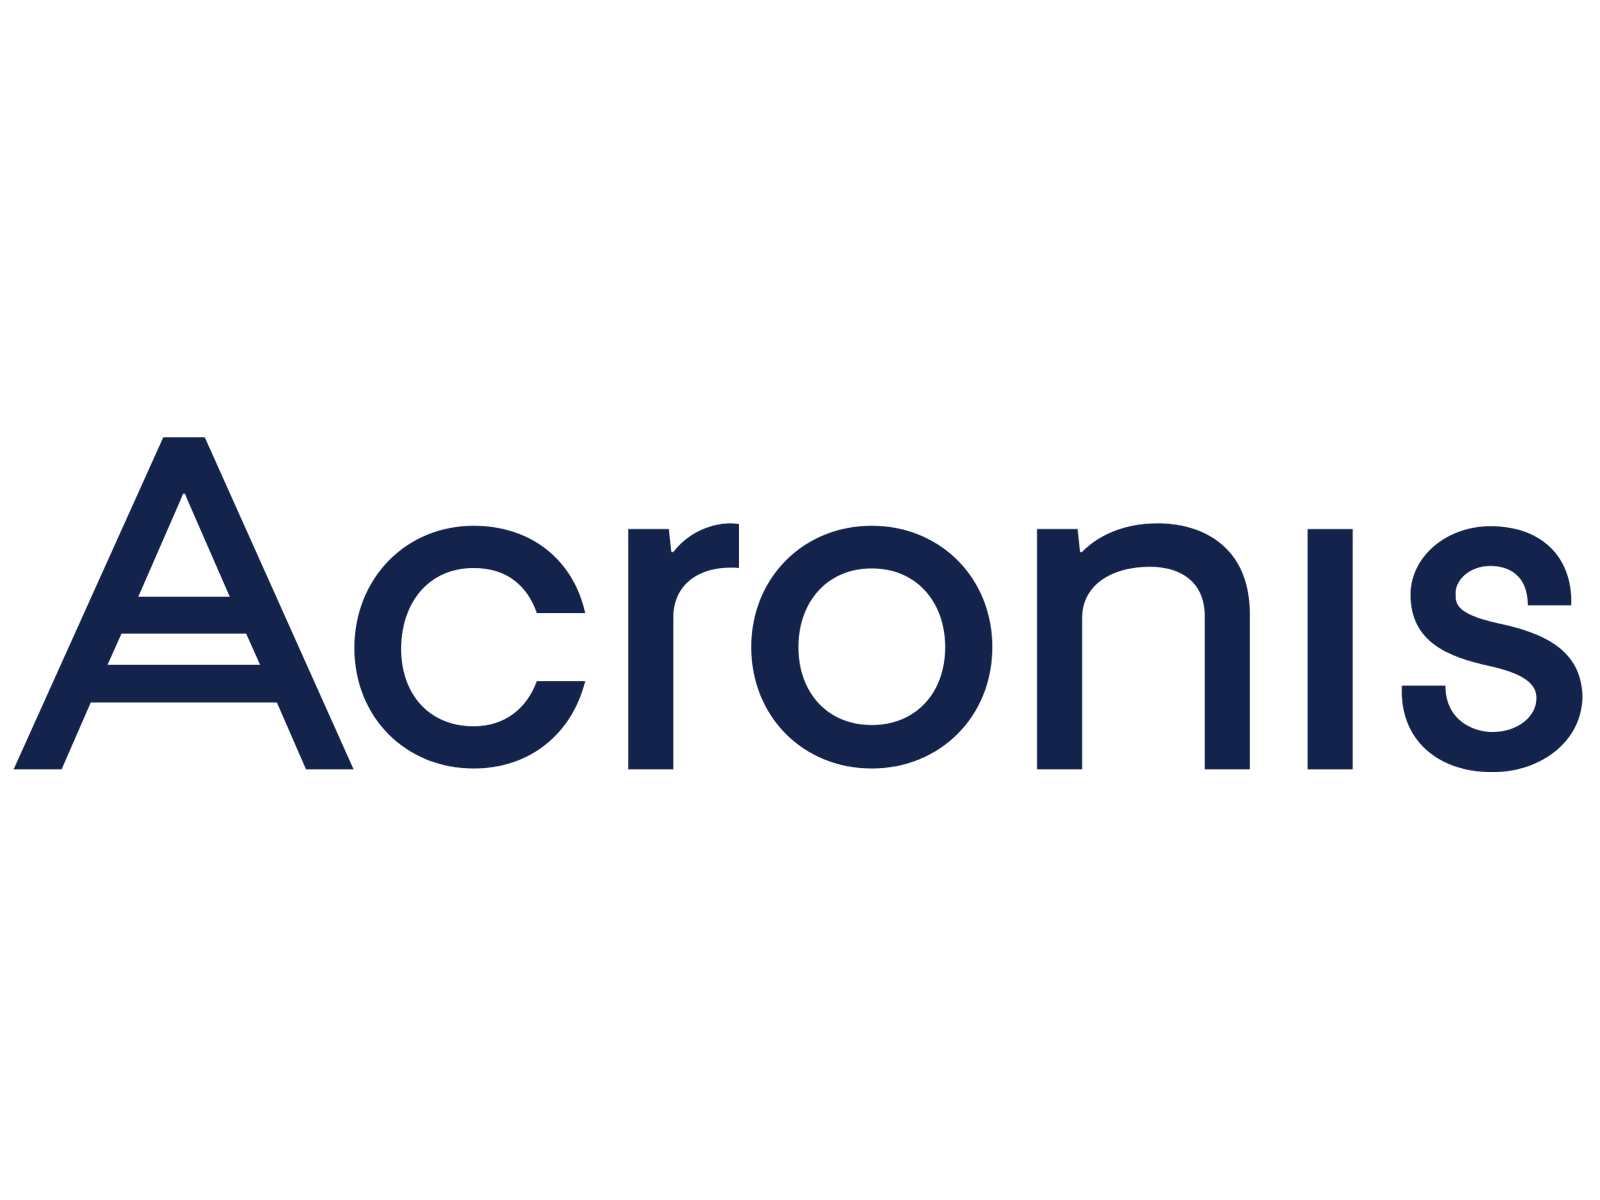 Communication & Collaboration as a Service by Acronis